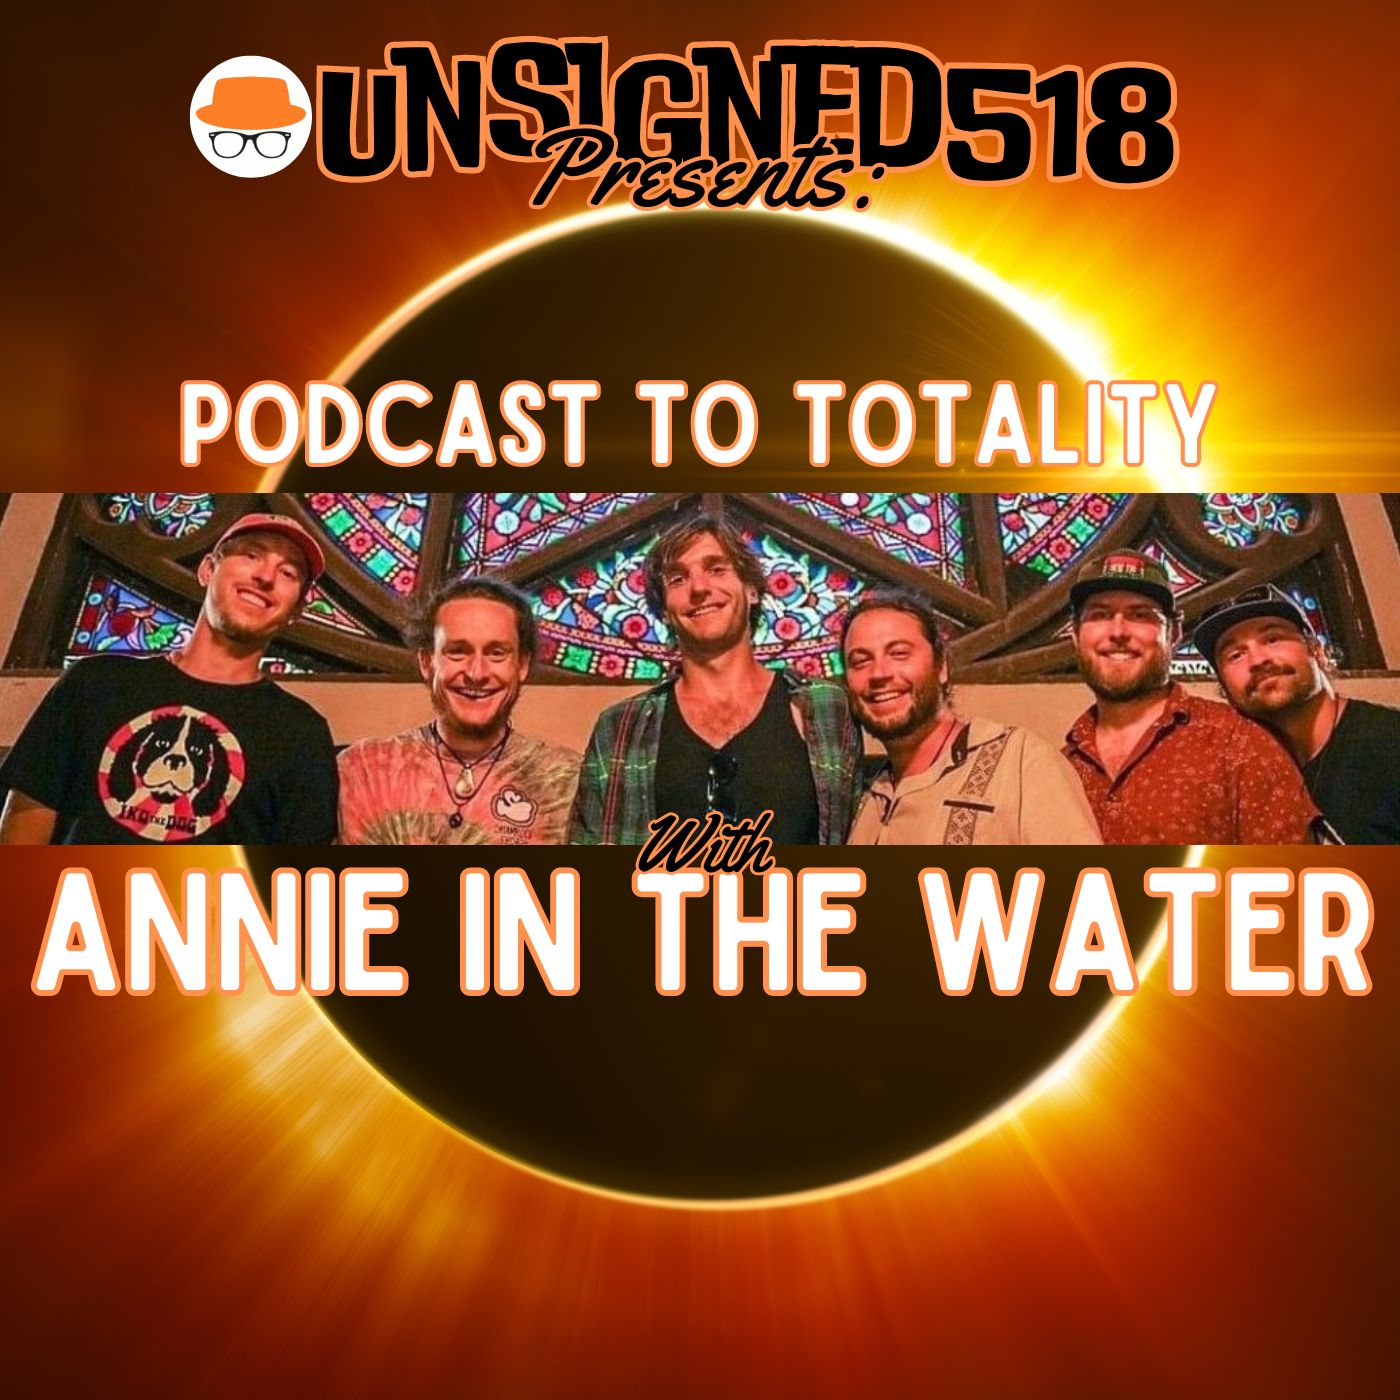 Unsigned518 presents - Podcast to Totality with Annie in the Water